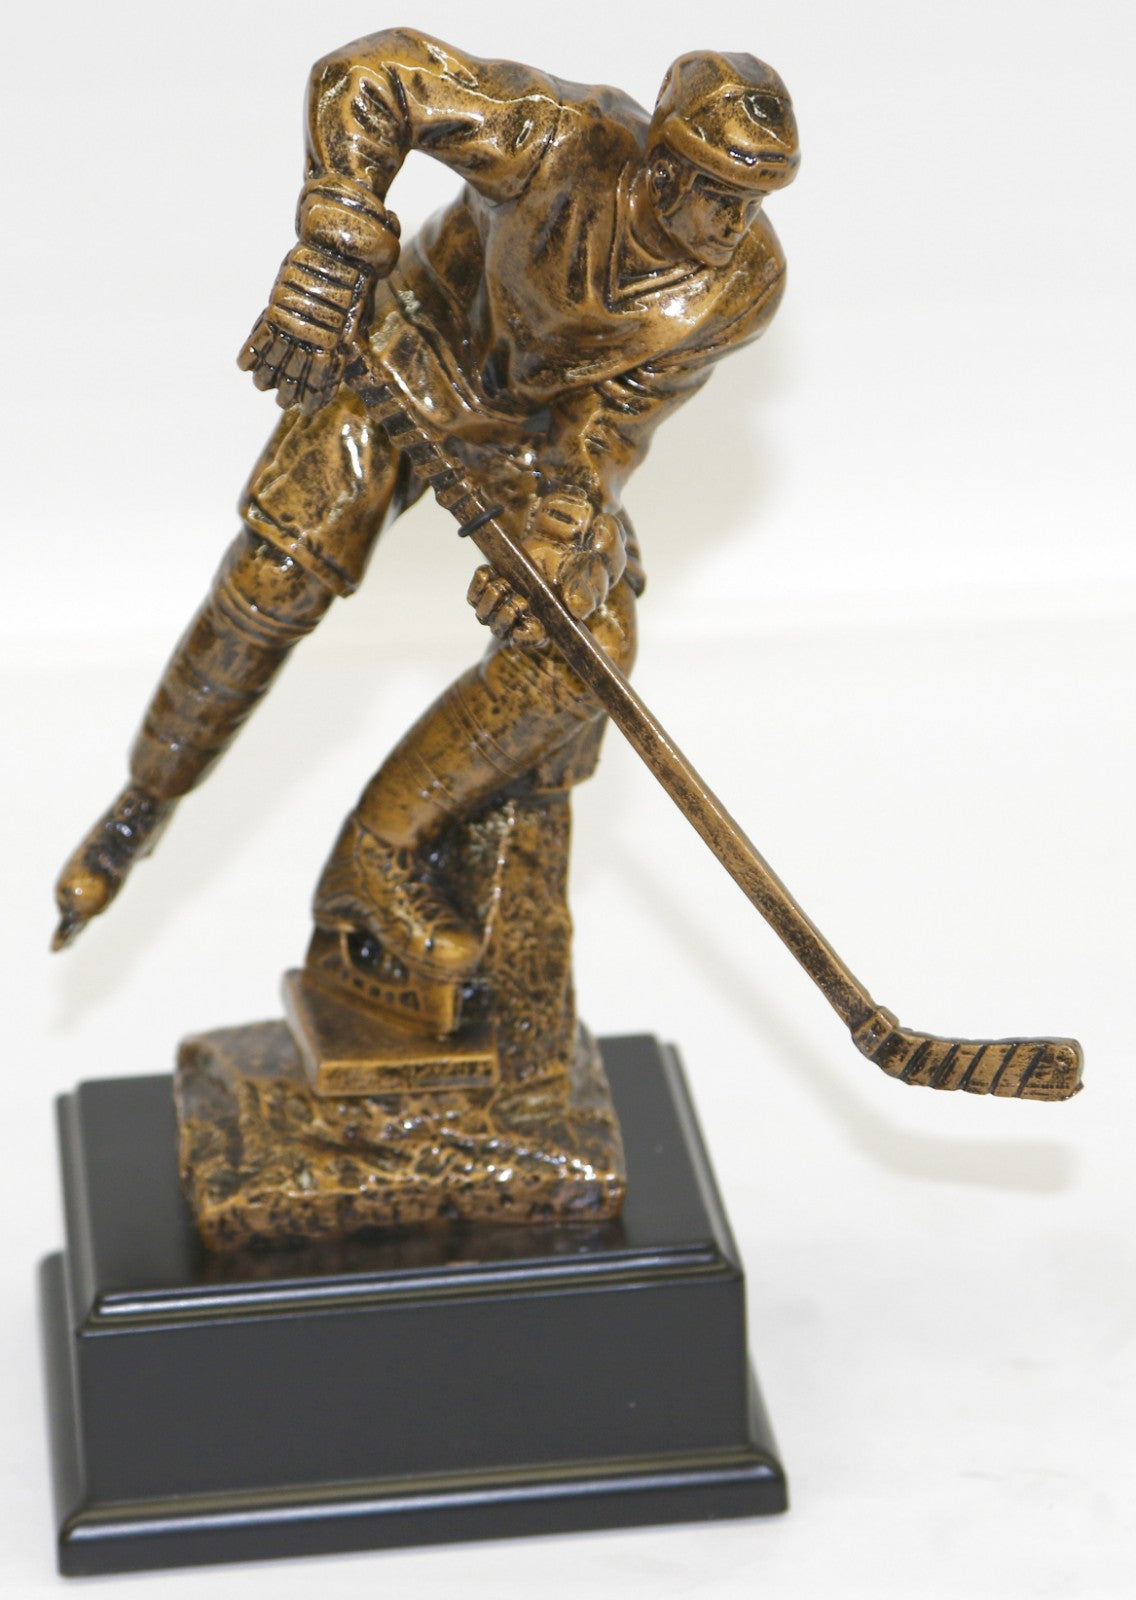 9" Tall Male Tennis Resin Trophy Sculpture With Base Figurine Figure Decor